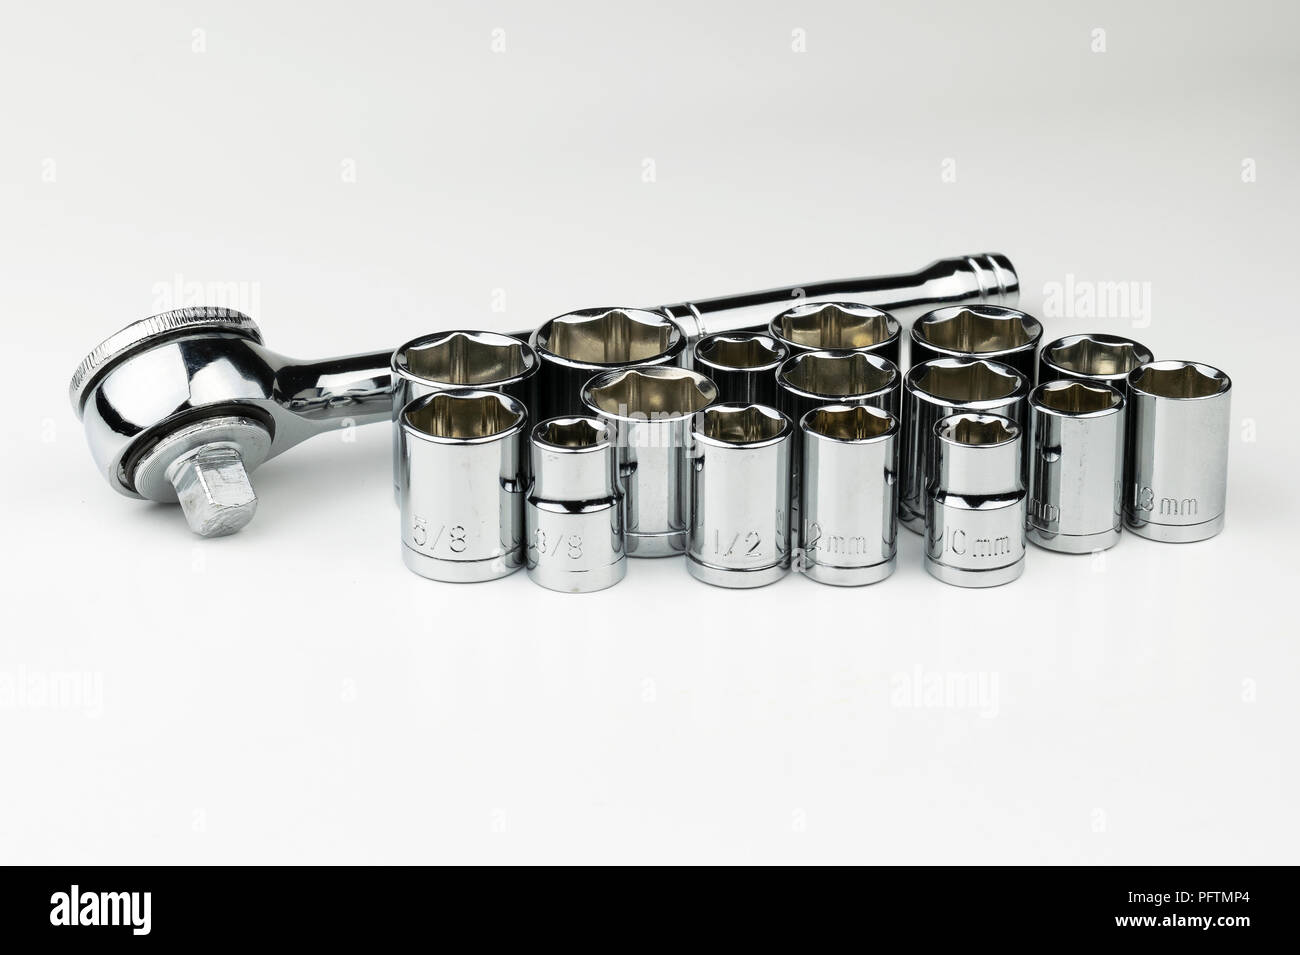 A shiny, silver, chrome socket wrench set with both SAE fractional sockets and metric sockets in millimeters on a white background like an automobile  Stock Photo